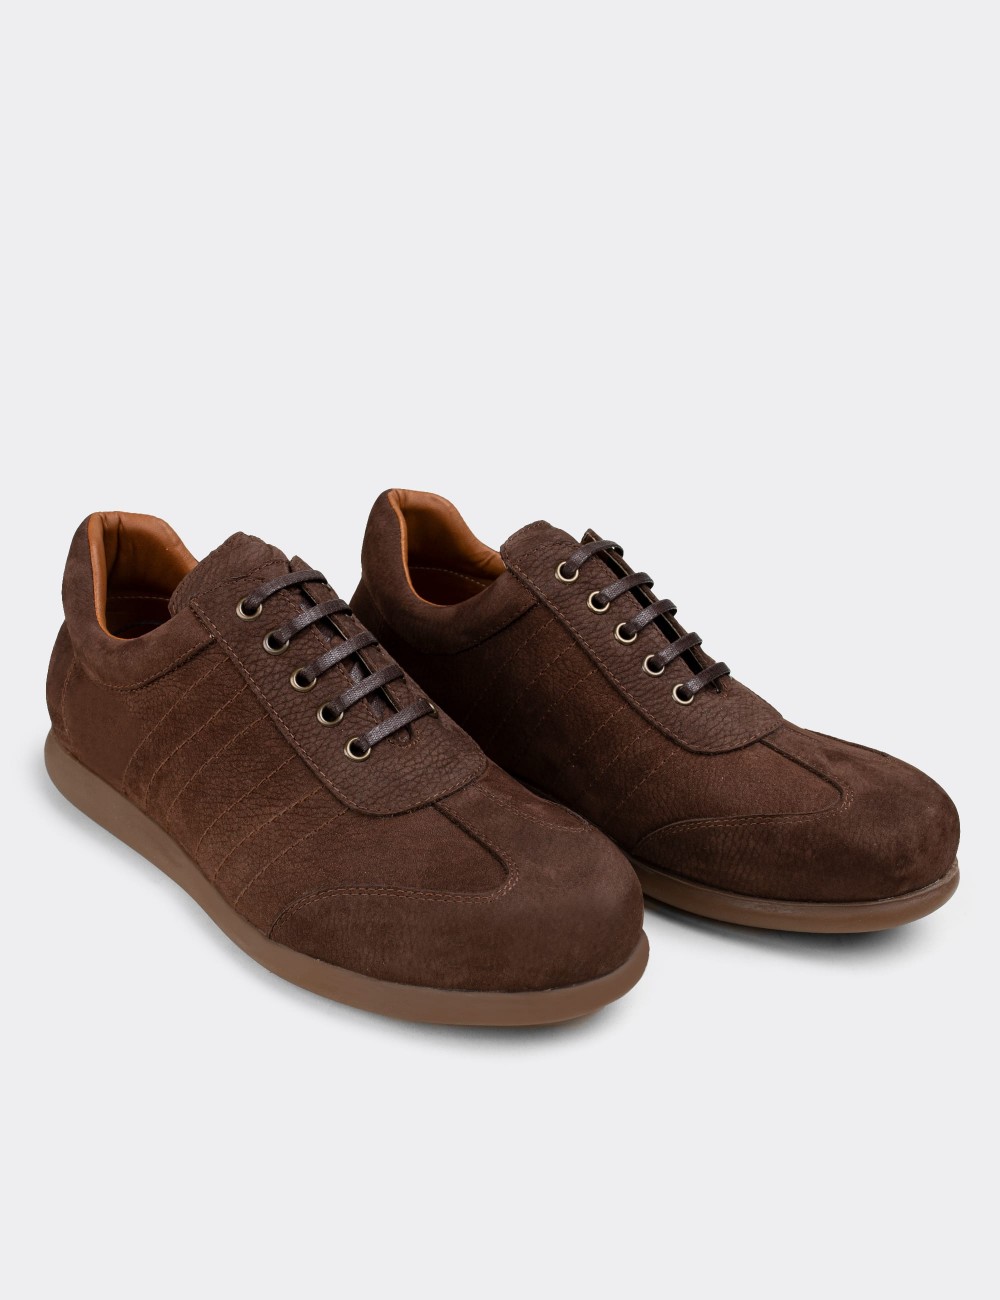 Brown Nubuck Leather Lace-up Shoes - 01826MKHVC01